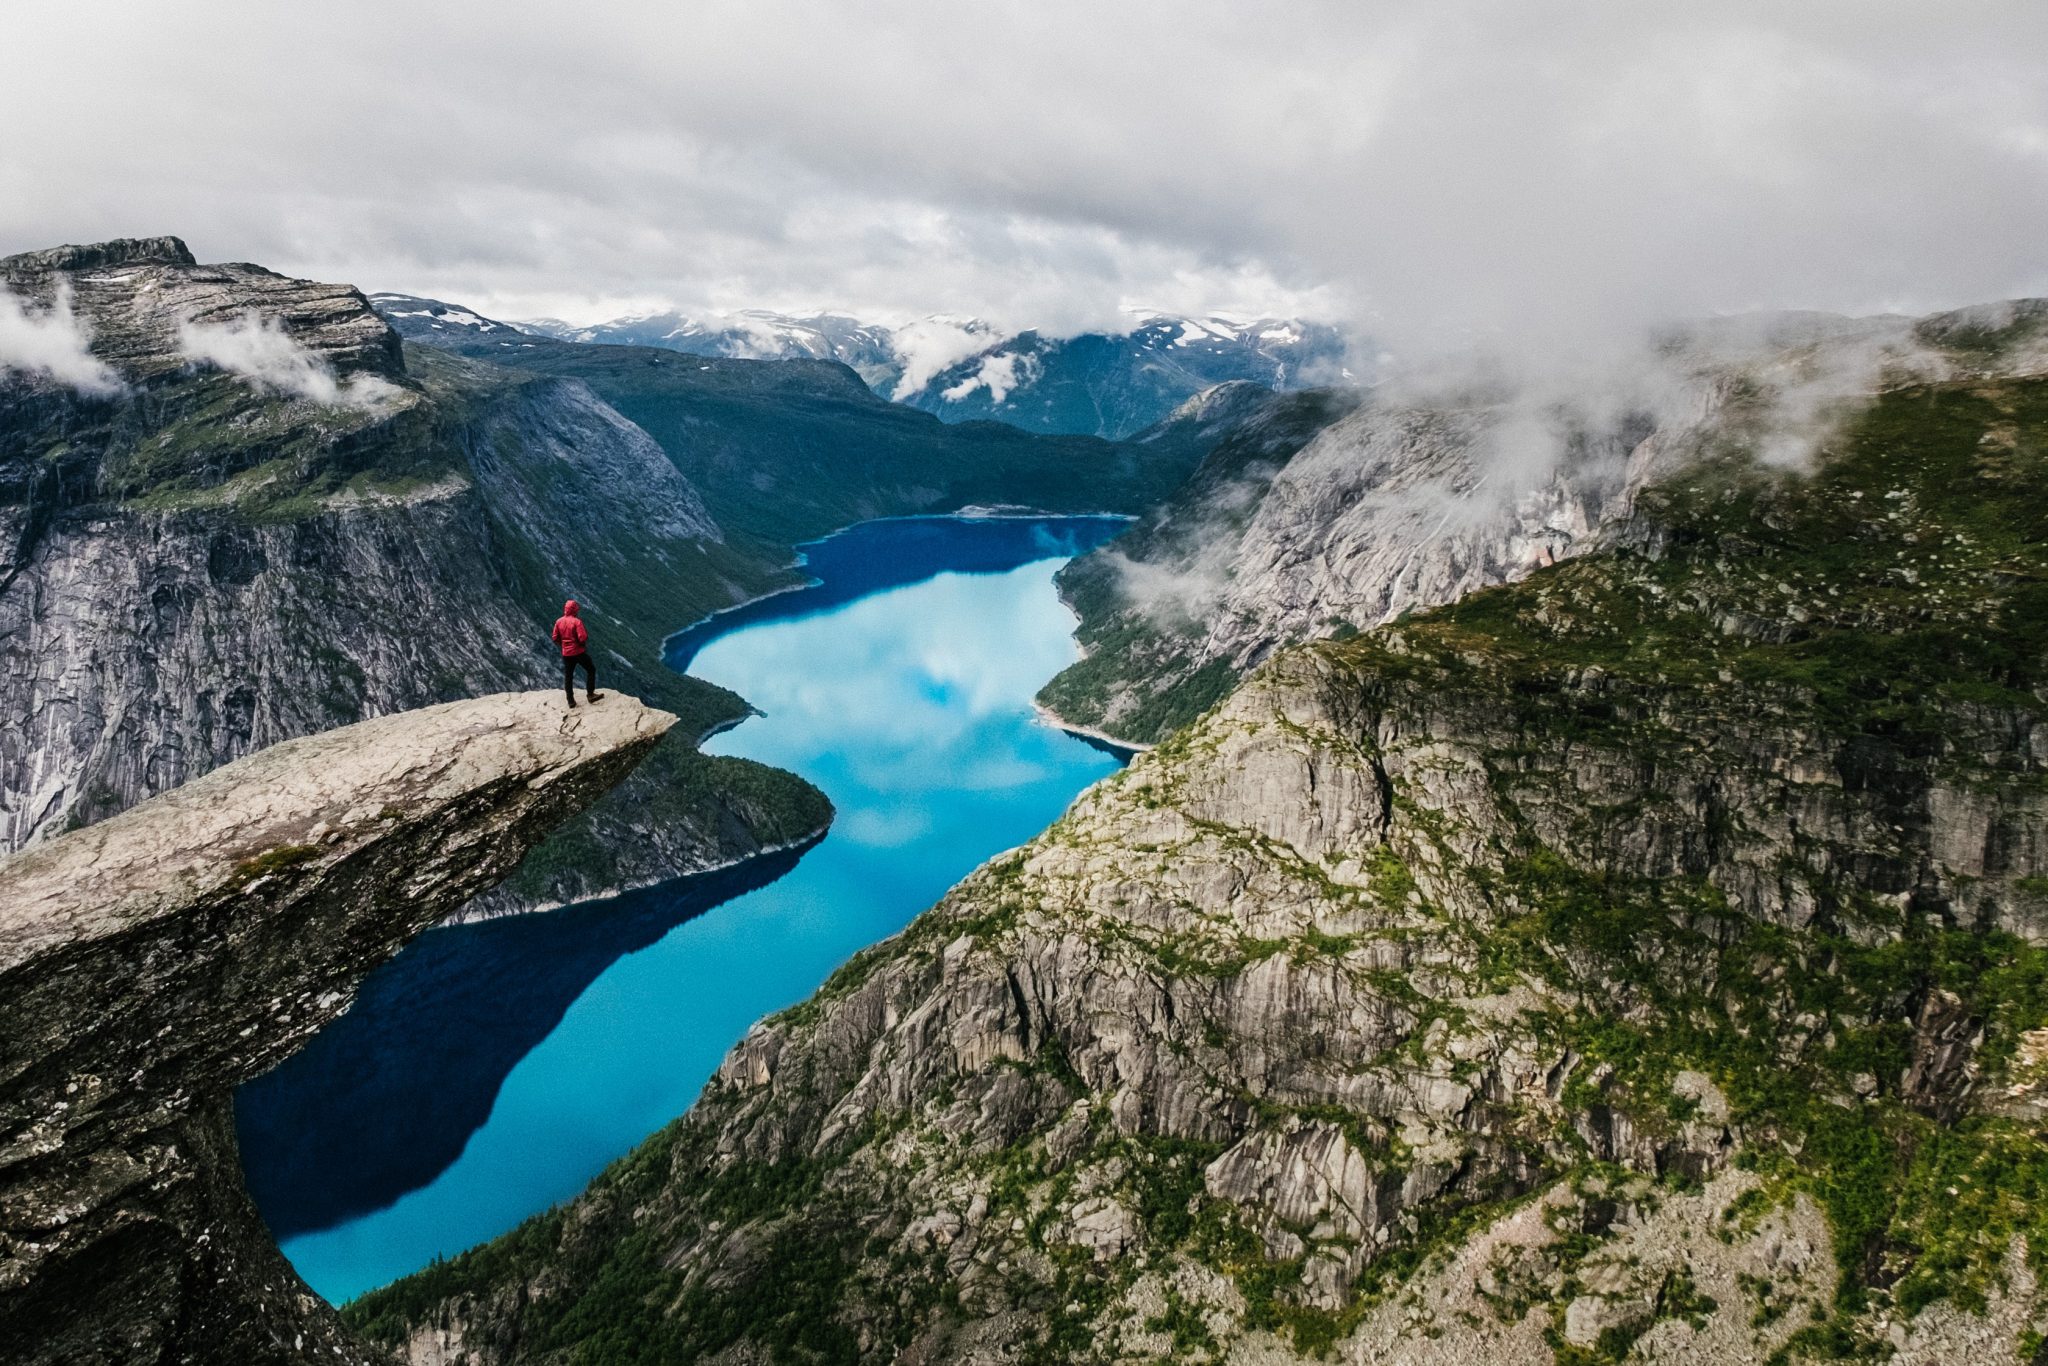 A professional photo of the Trolltunga passage in Norway. A man stands at the edge of a giant cliff overlooking and mountainous valley with a crystal clear blue river snaking through.